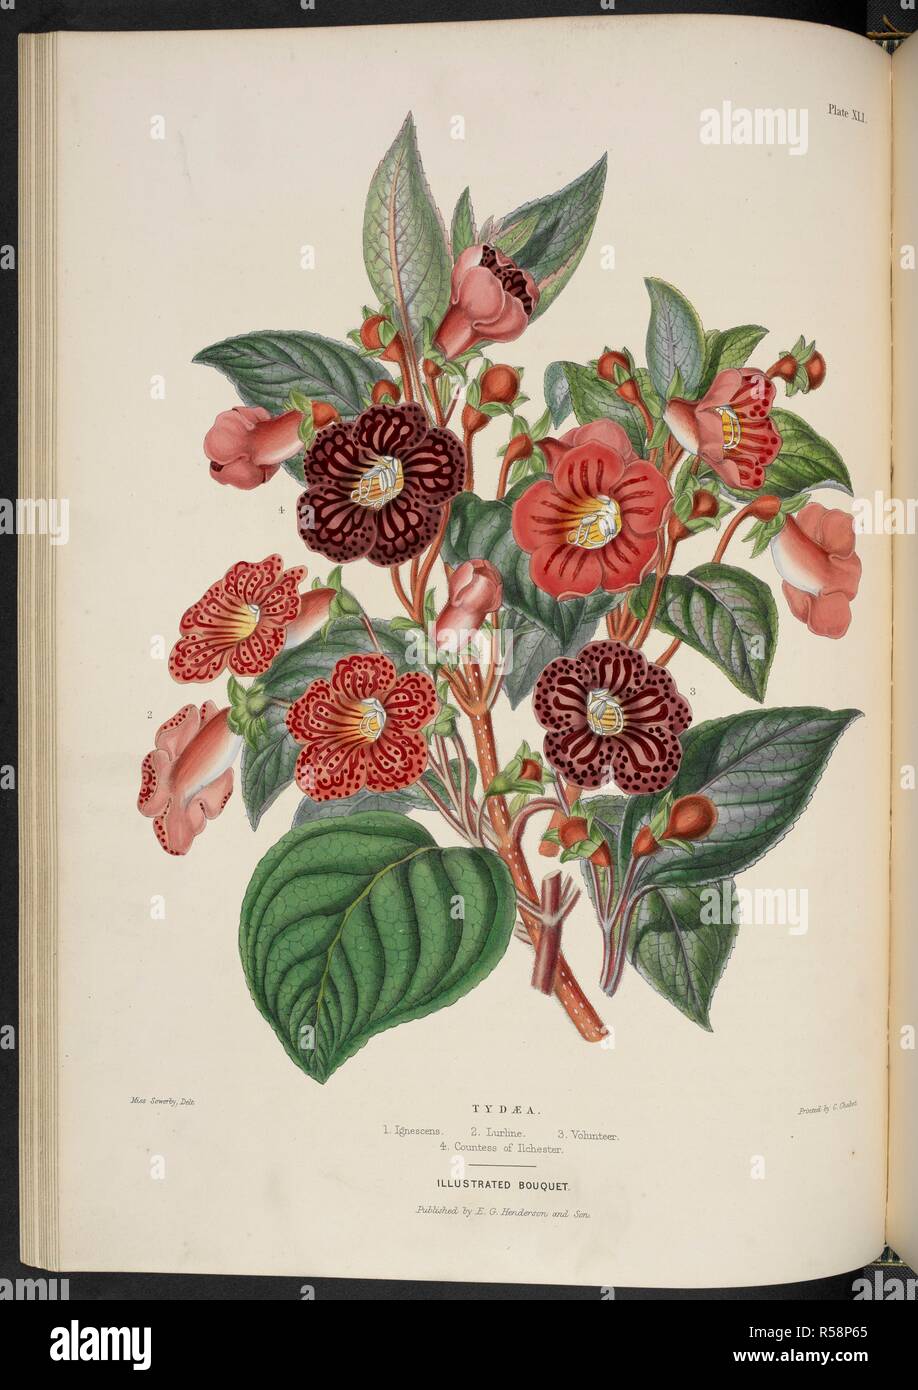 New varities of TydÃ¦. Tydaea. 1. Ignescens; 2. Lurline; 3. Volunteer; 4. Countess of Ilchester. . The Illustrated Bouquet, consisting of figures, with descriptions of new flowers. London, 1857-64. Source: 1823.c.13 plate 41. Author: Henderson, Edward George. Sowerby, Miss. Stock Photo